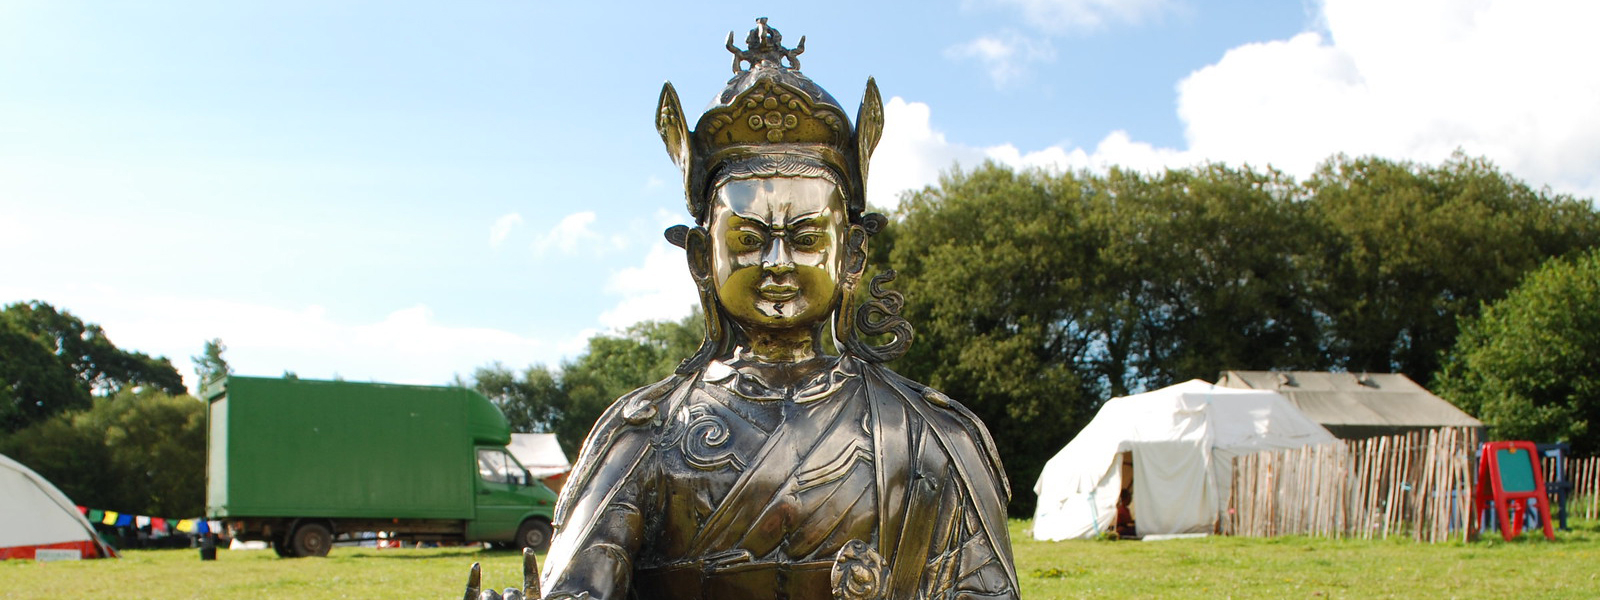 /buddhist Padmasambhava statue in front of a blue sky and some tents in a field